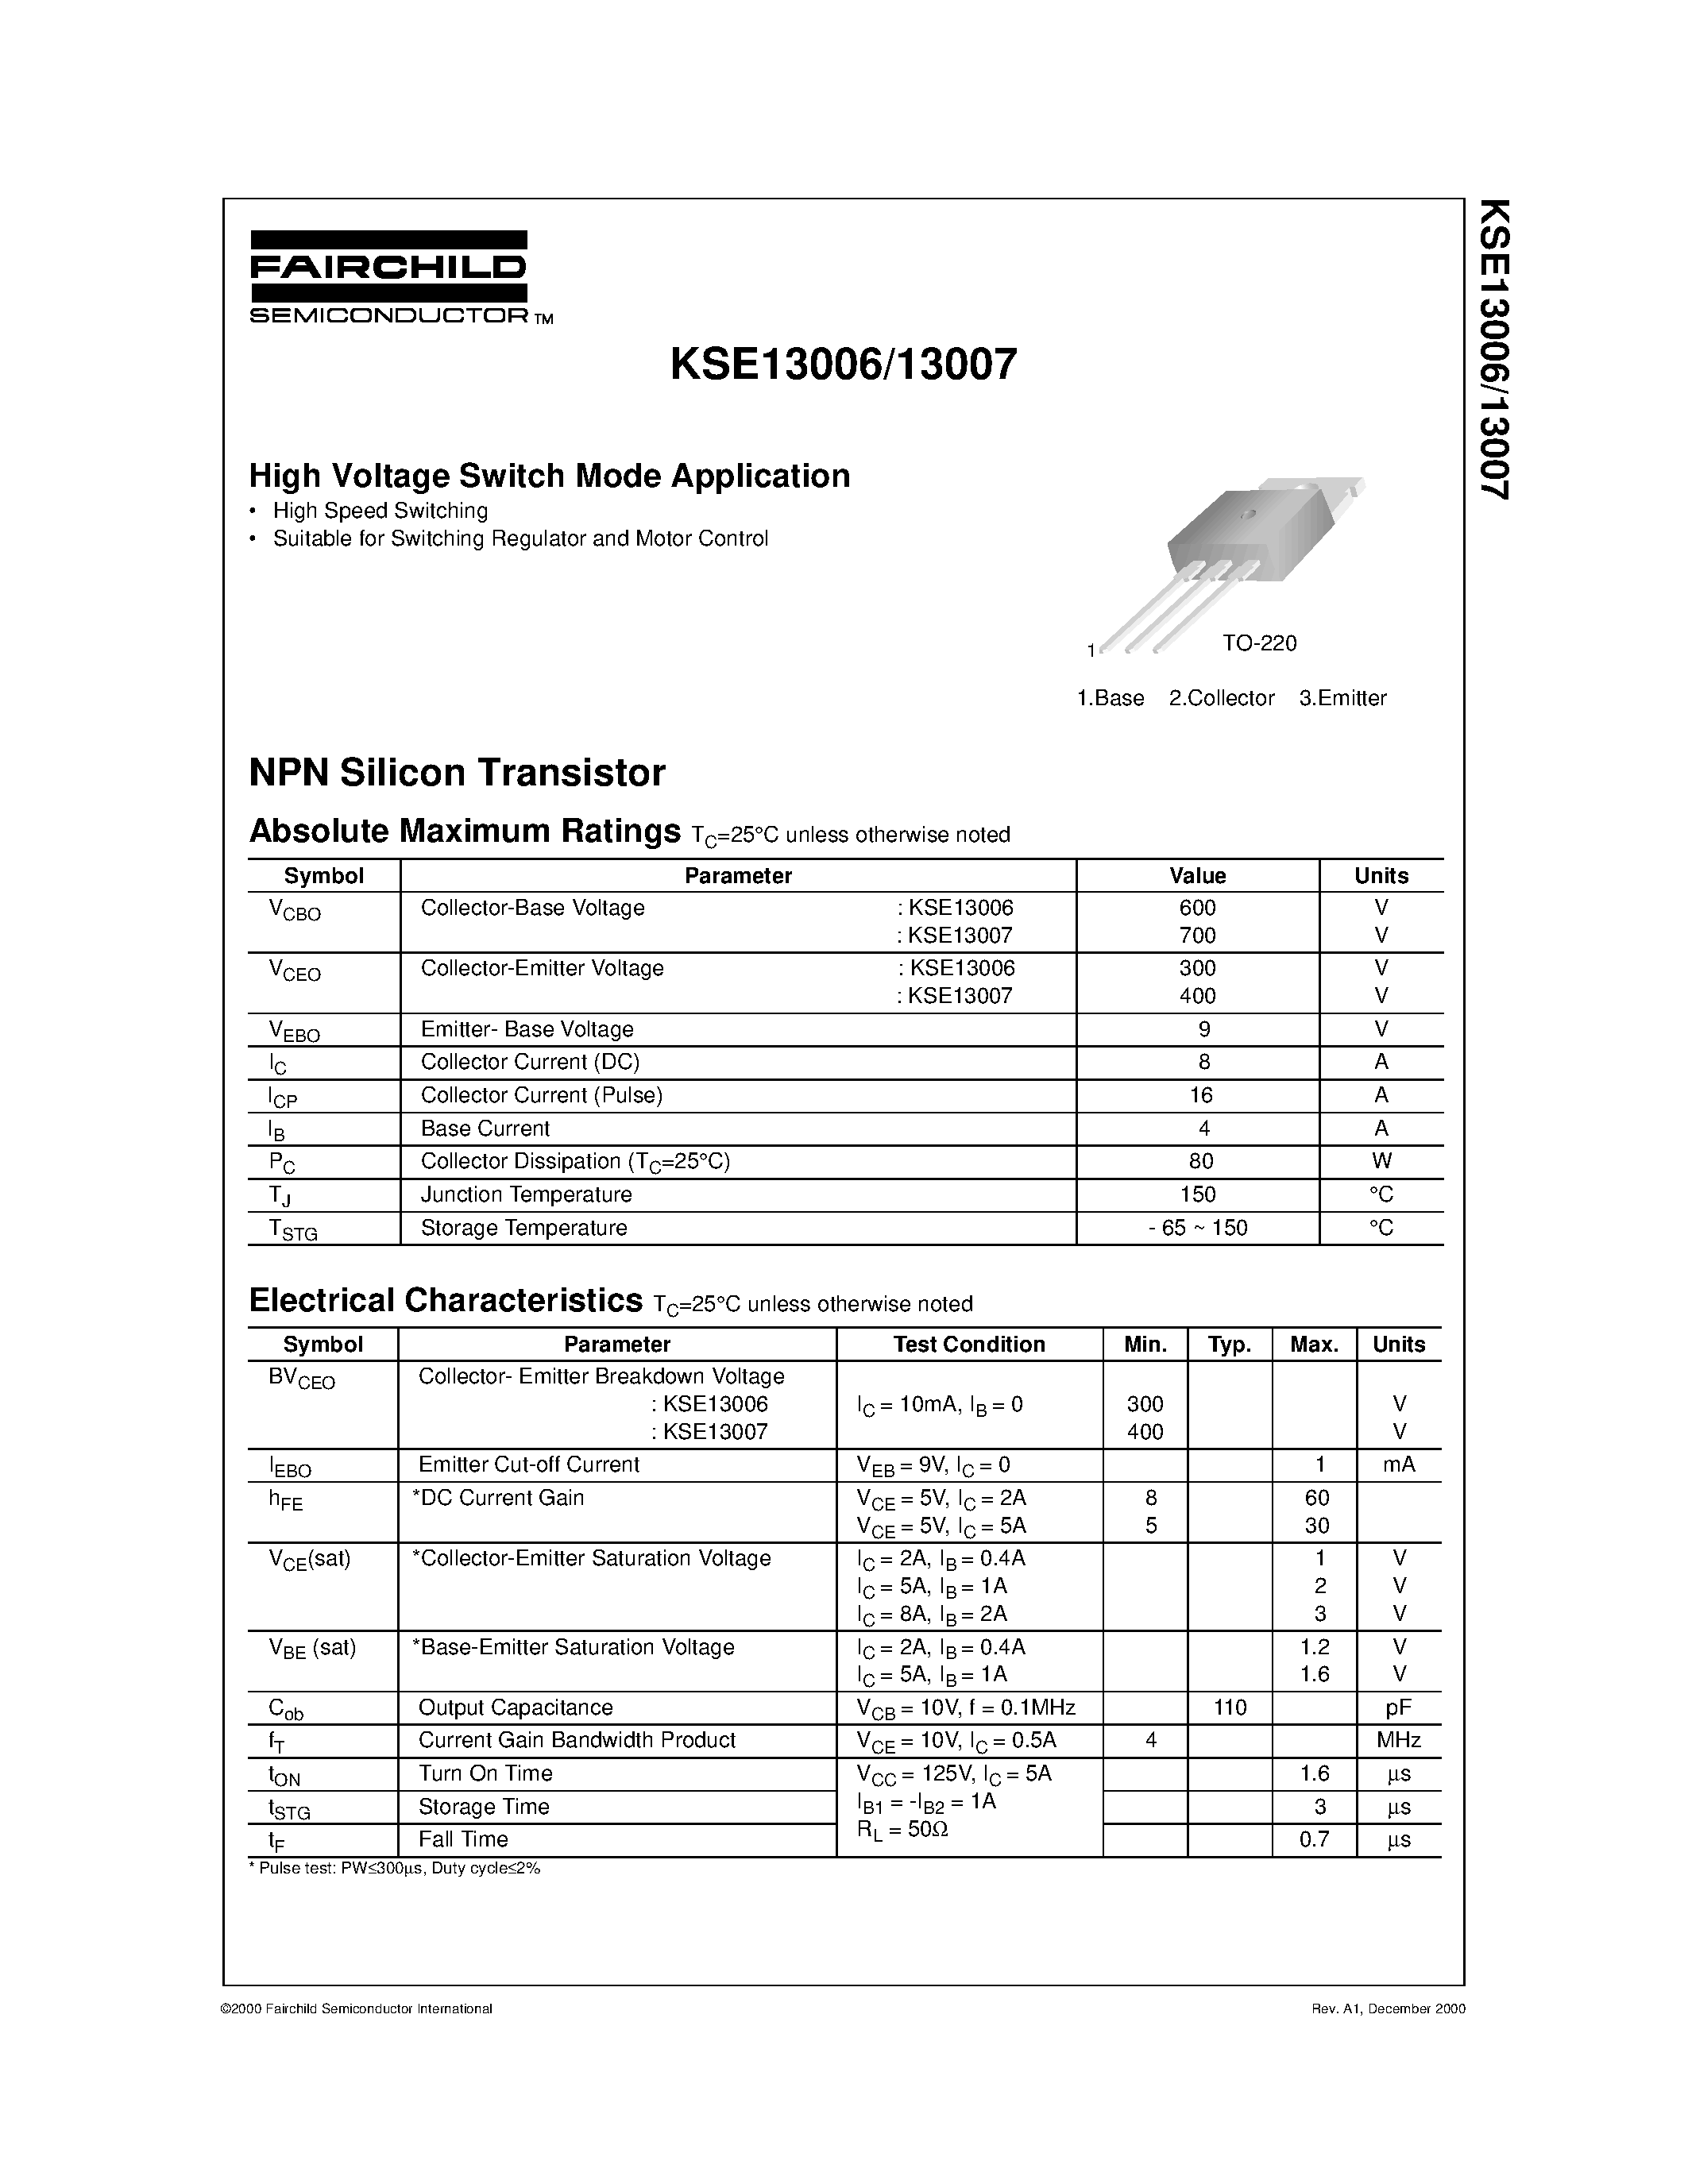 Datasheet KSE13006 - High Voltage Switch Mode Application page 1